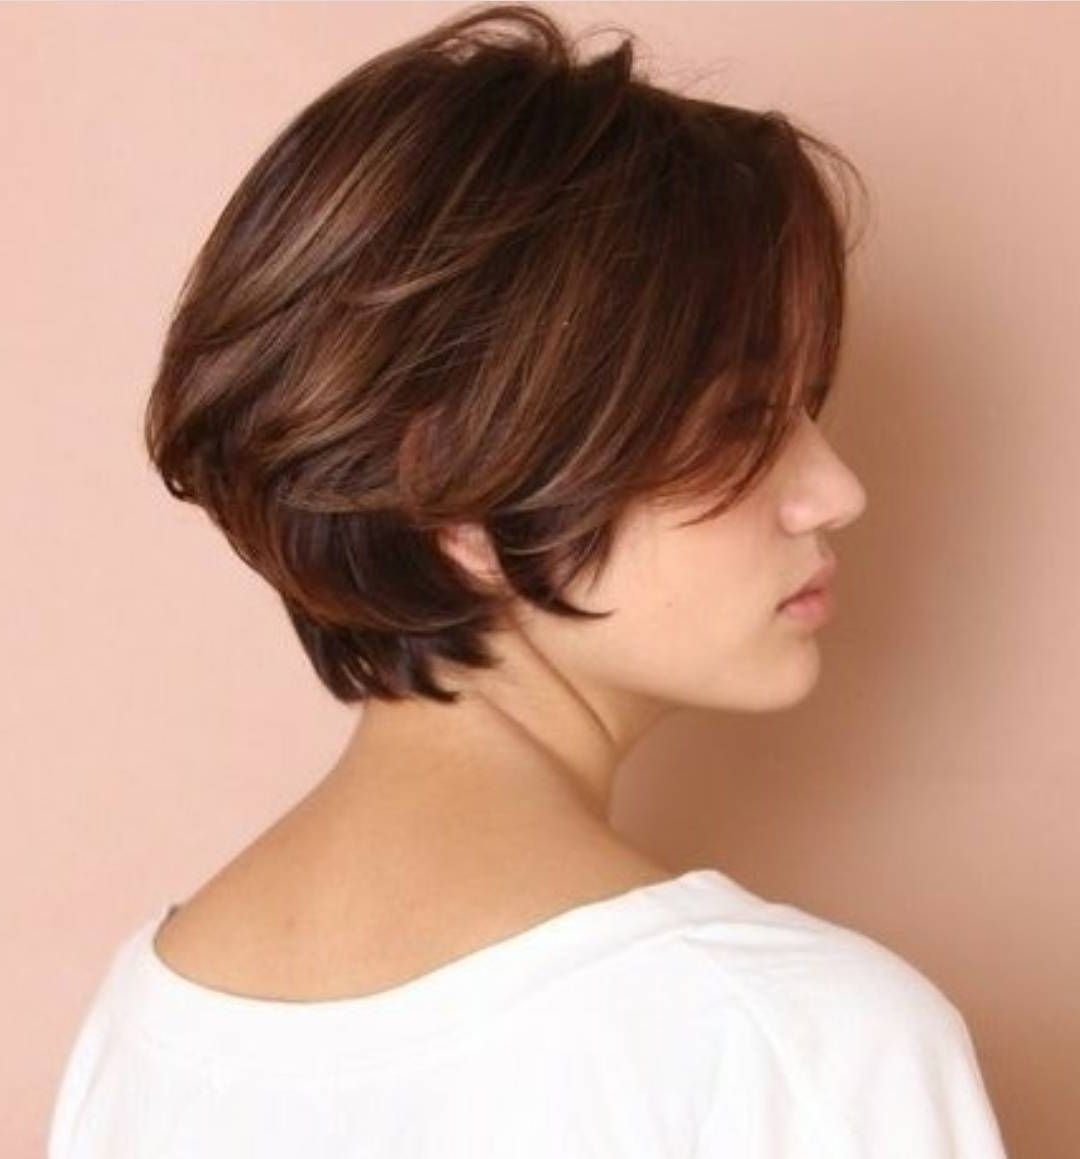 10 Chic Short Bob Haircuts That Balance Your Face Shape! – Short For Most Recent Choppy Side Parted Pixie Bob Haircuts (View 12 of 15)